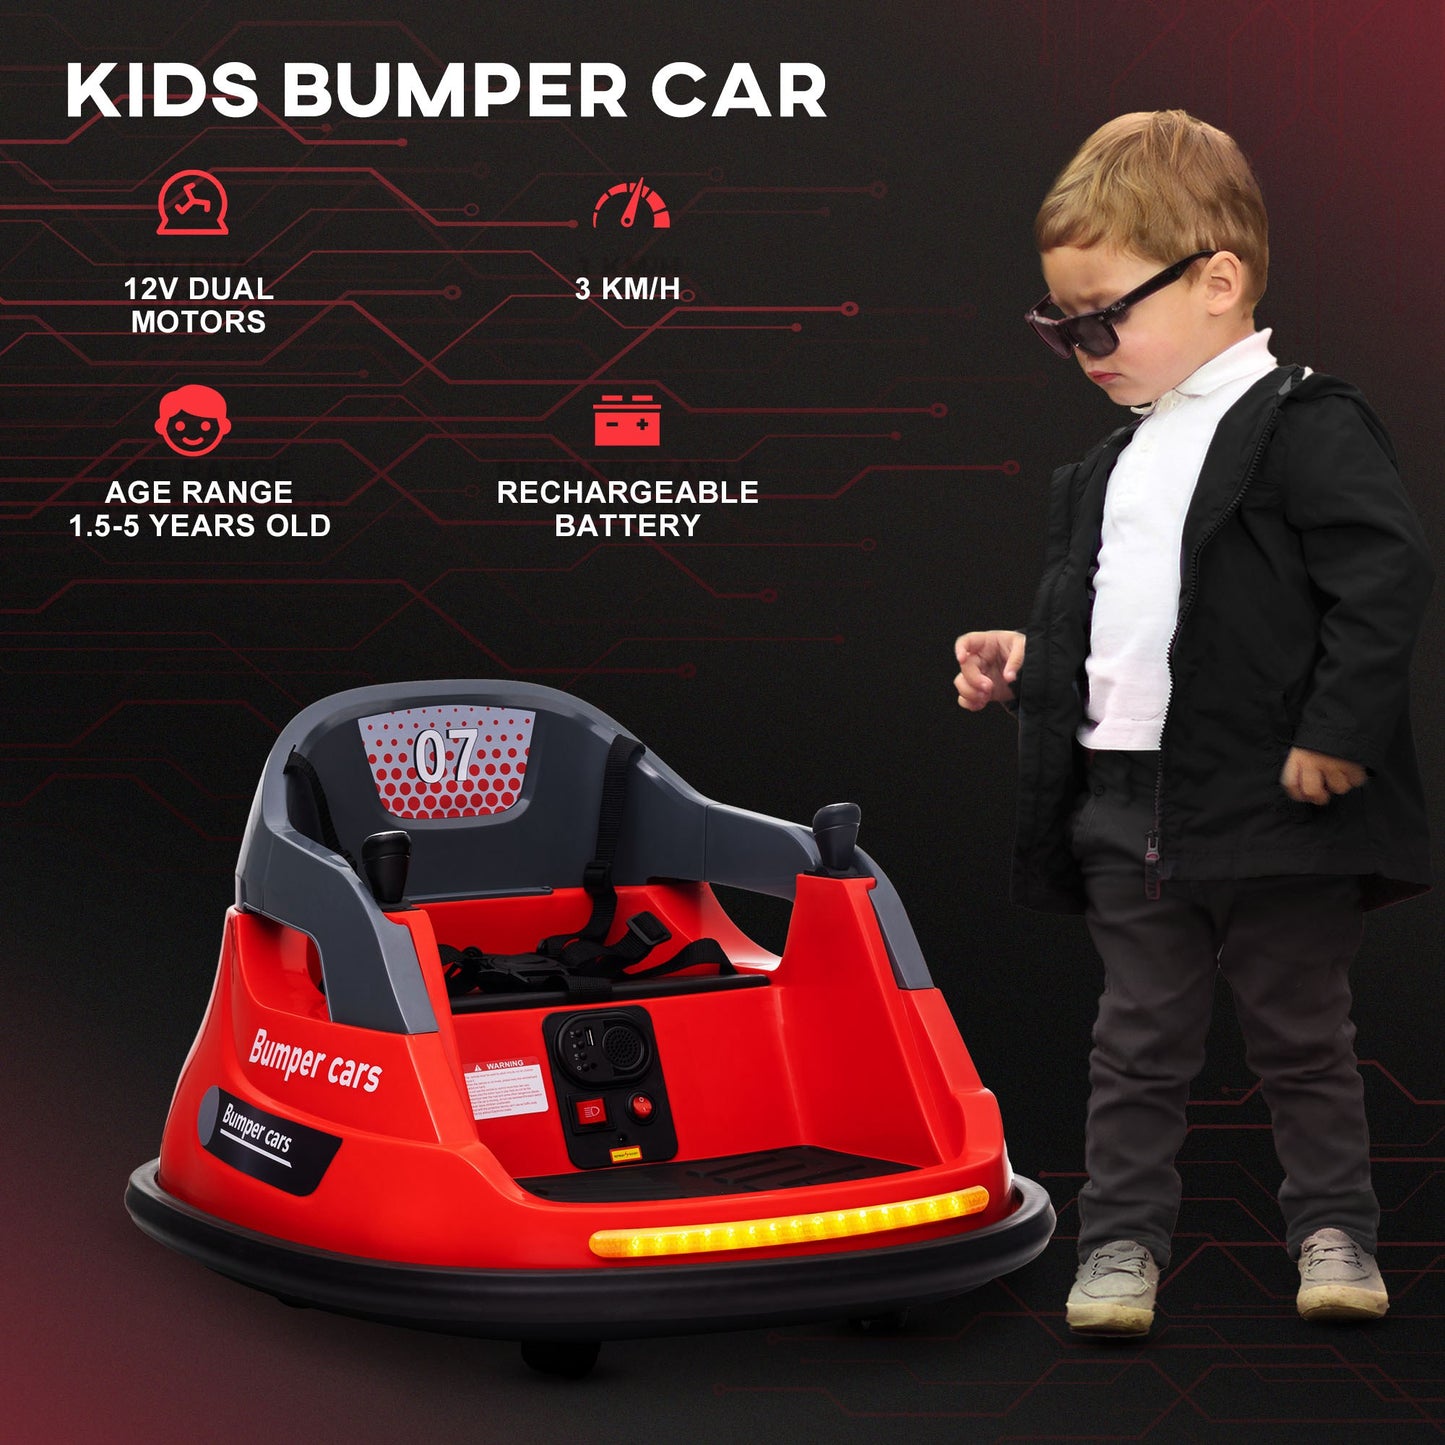 HOMCOM Bumper Car 360° Rotation Spin 12V Kids Electric Car with Lights Music for Ages 1.5-5 Years - Red